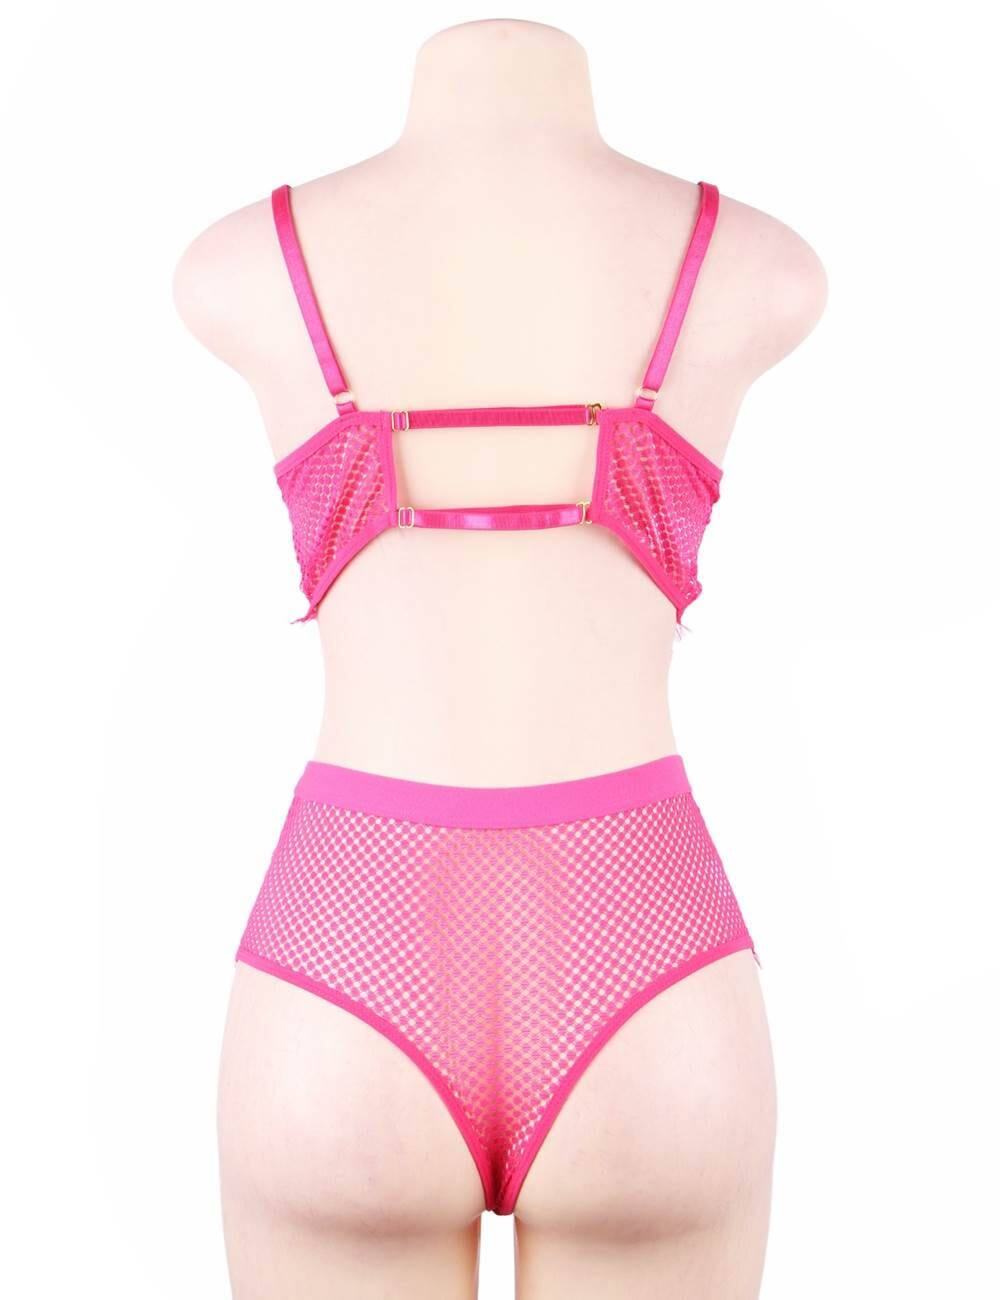 a female mannequin wearing a pink lingerie